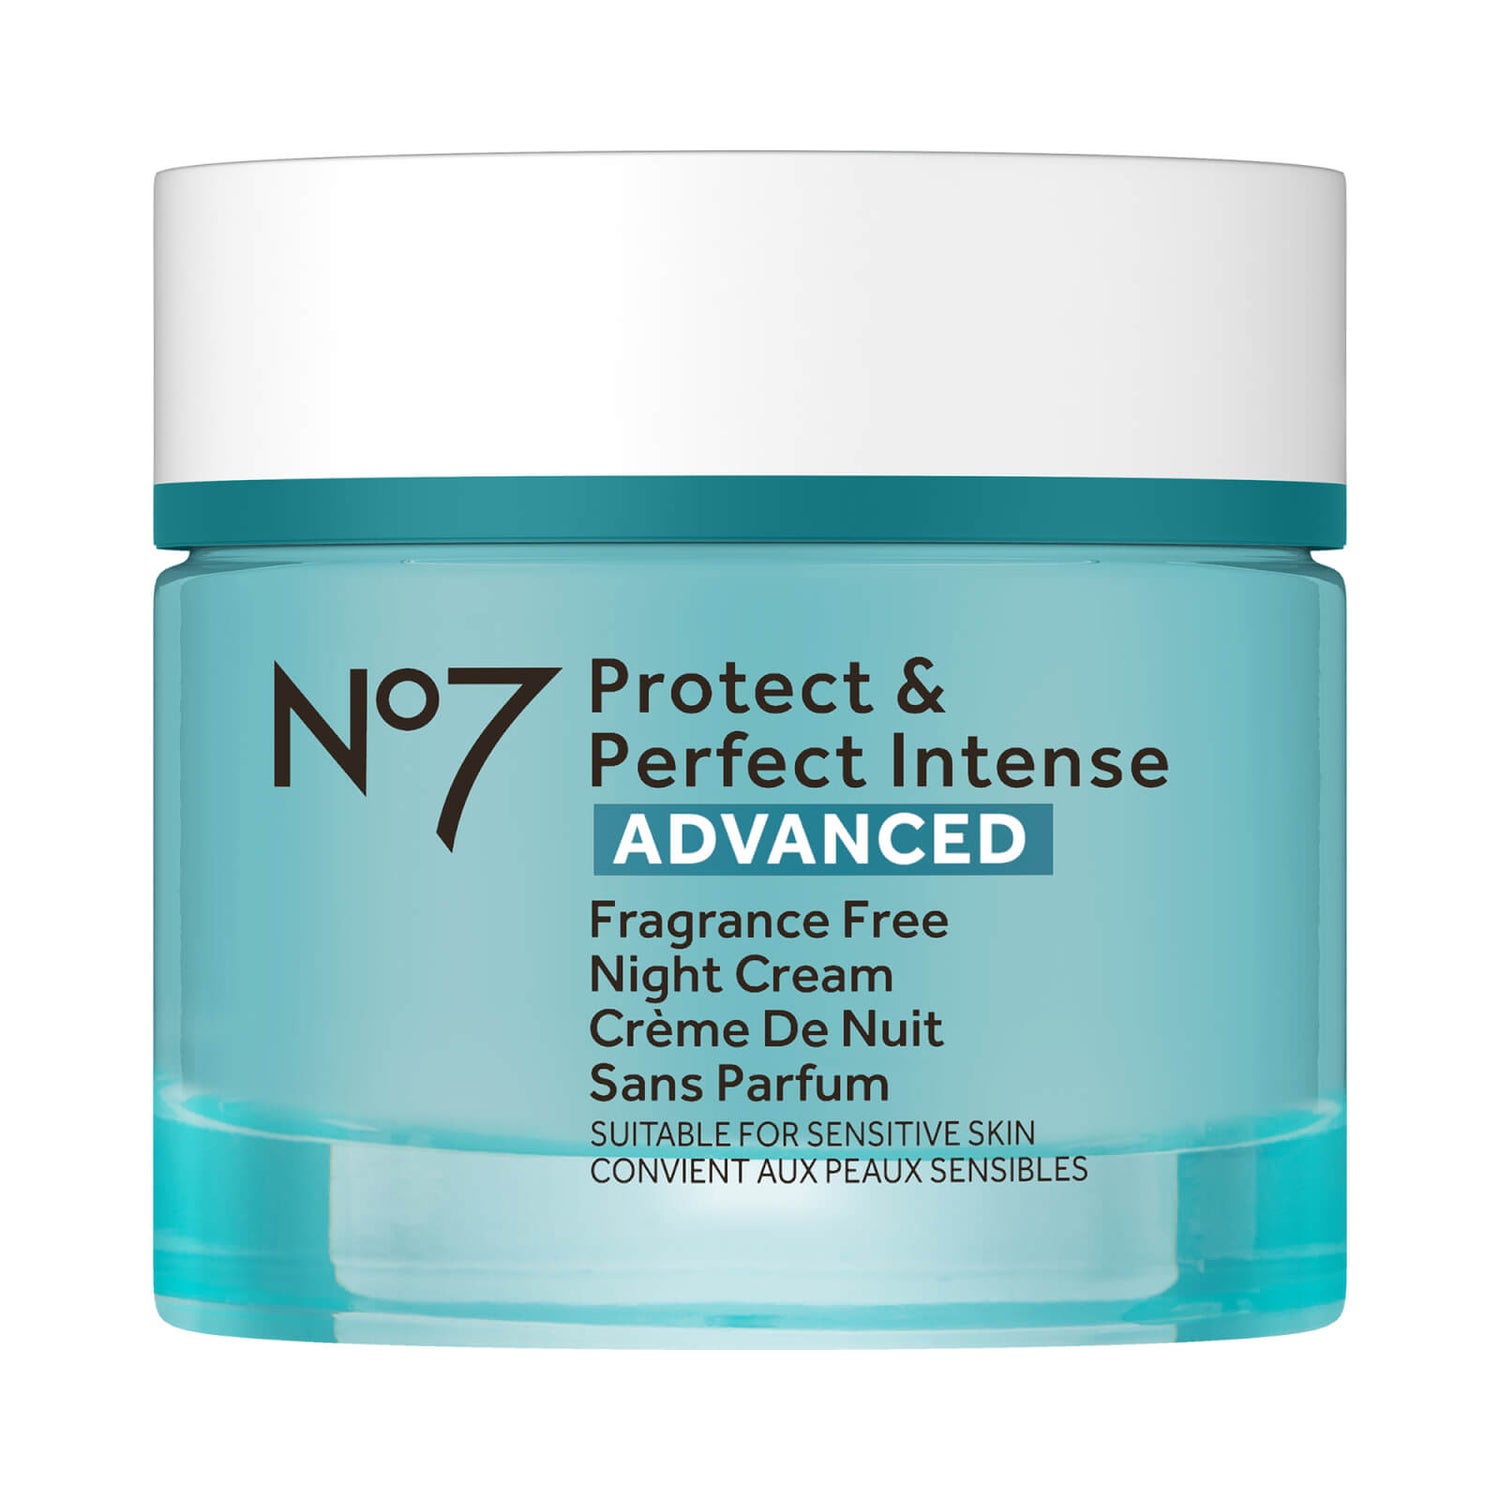 No7 Protect & Perfect Fragrance Free Day Cream SPF 30